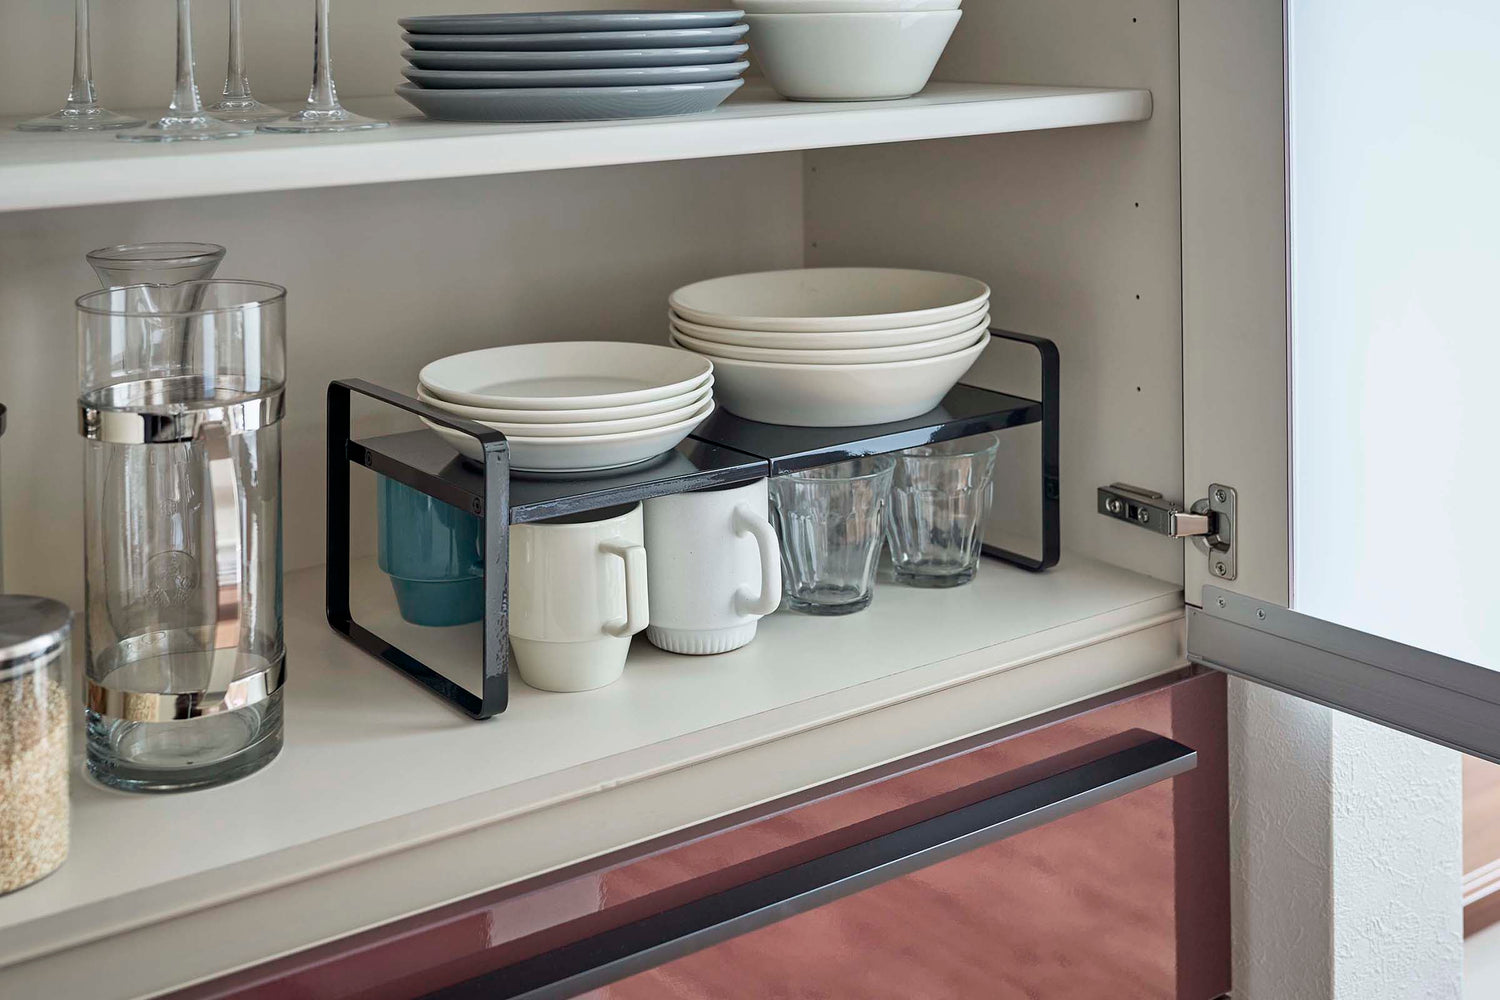 View 11 - Black Expandable Countertop Organizer expanded holding plates above cups in kitchen cabinet by Yamazaki Home.